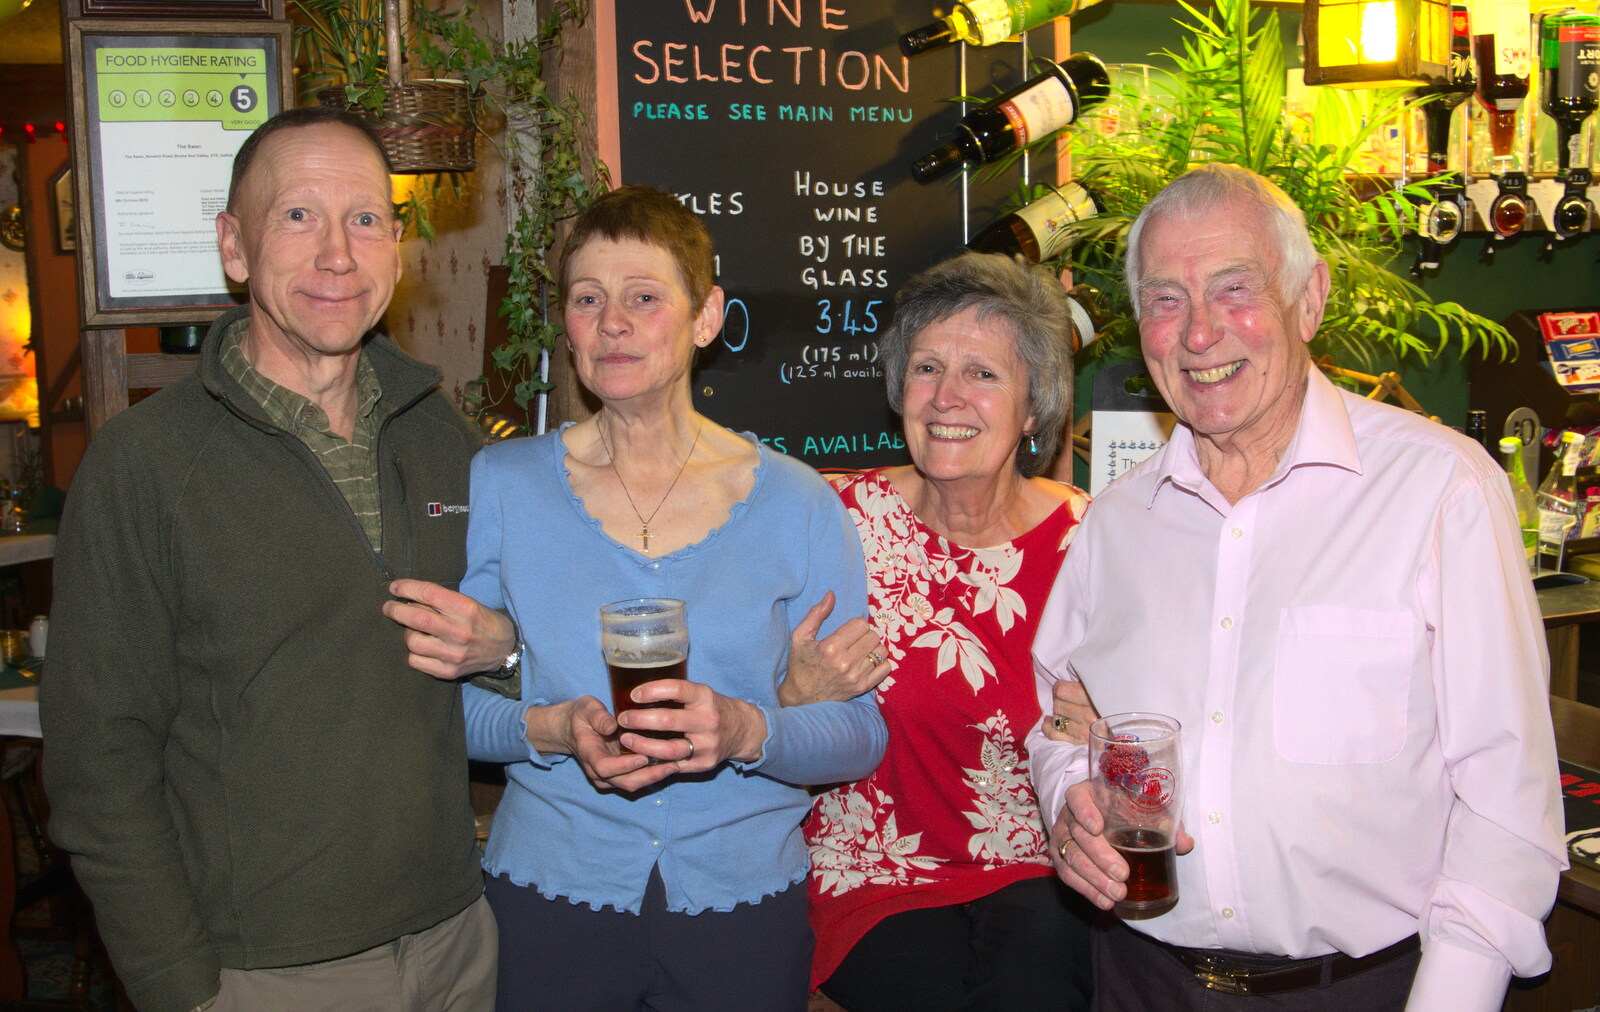 Apple, Pip, Jill and Colin from Sylvia's 70th Birthday up the Swan Inn, Brome, Suffolk - 11th February 2017